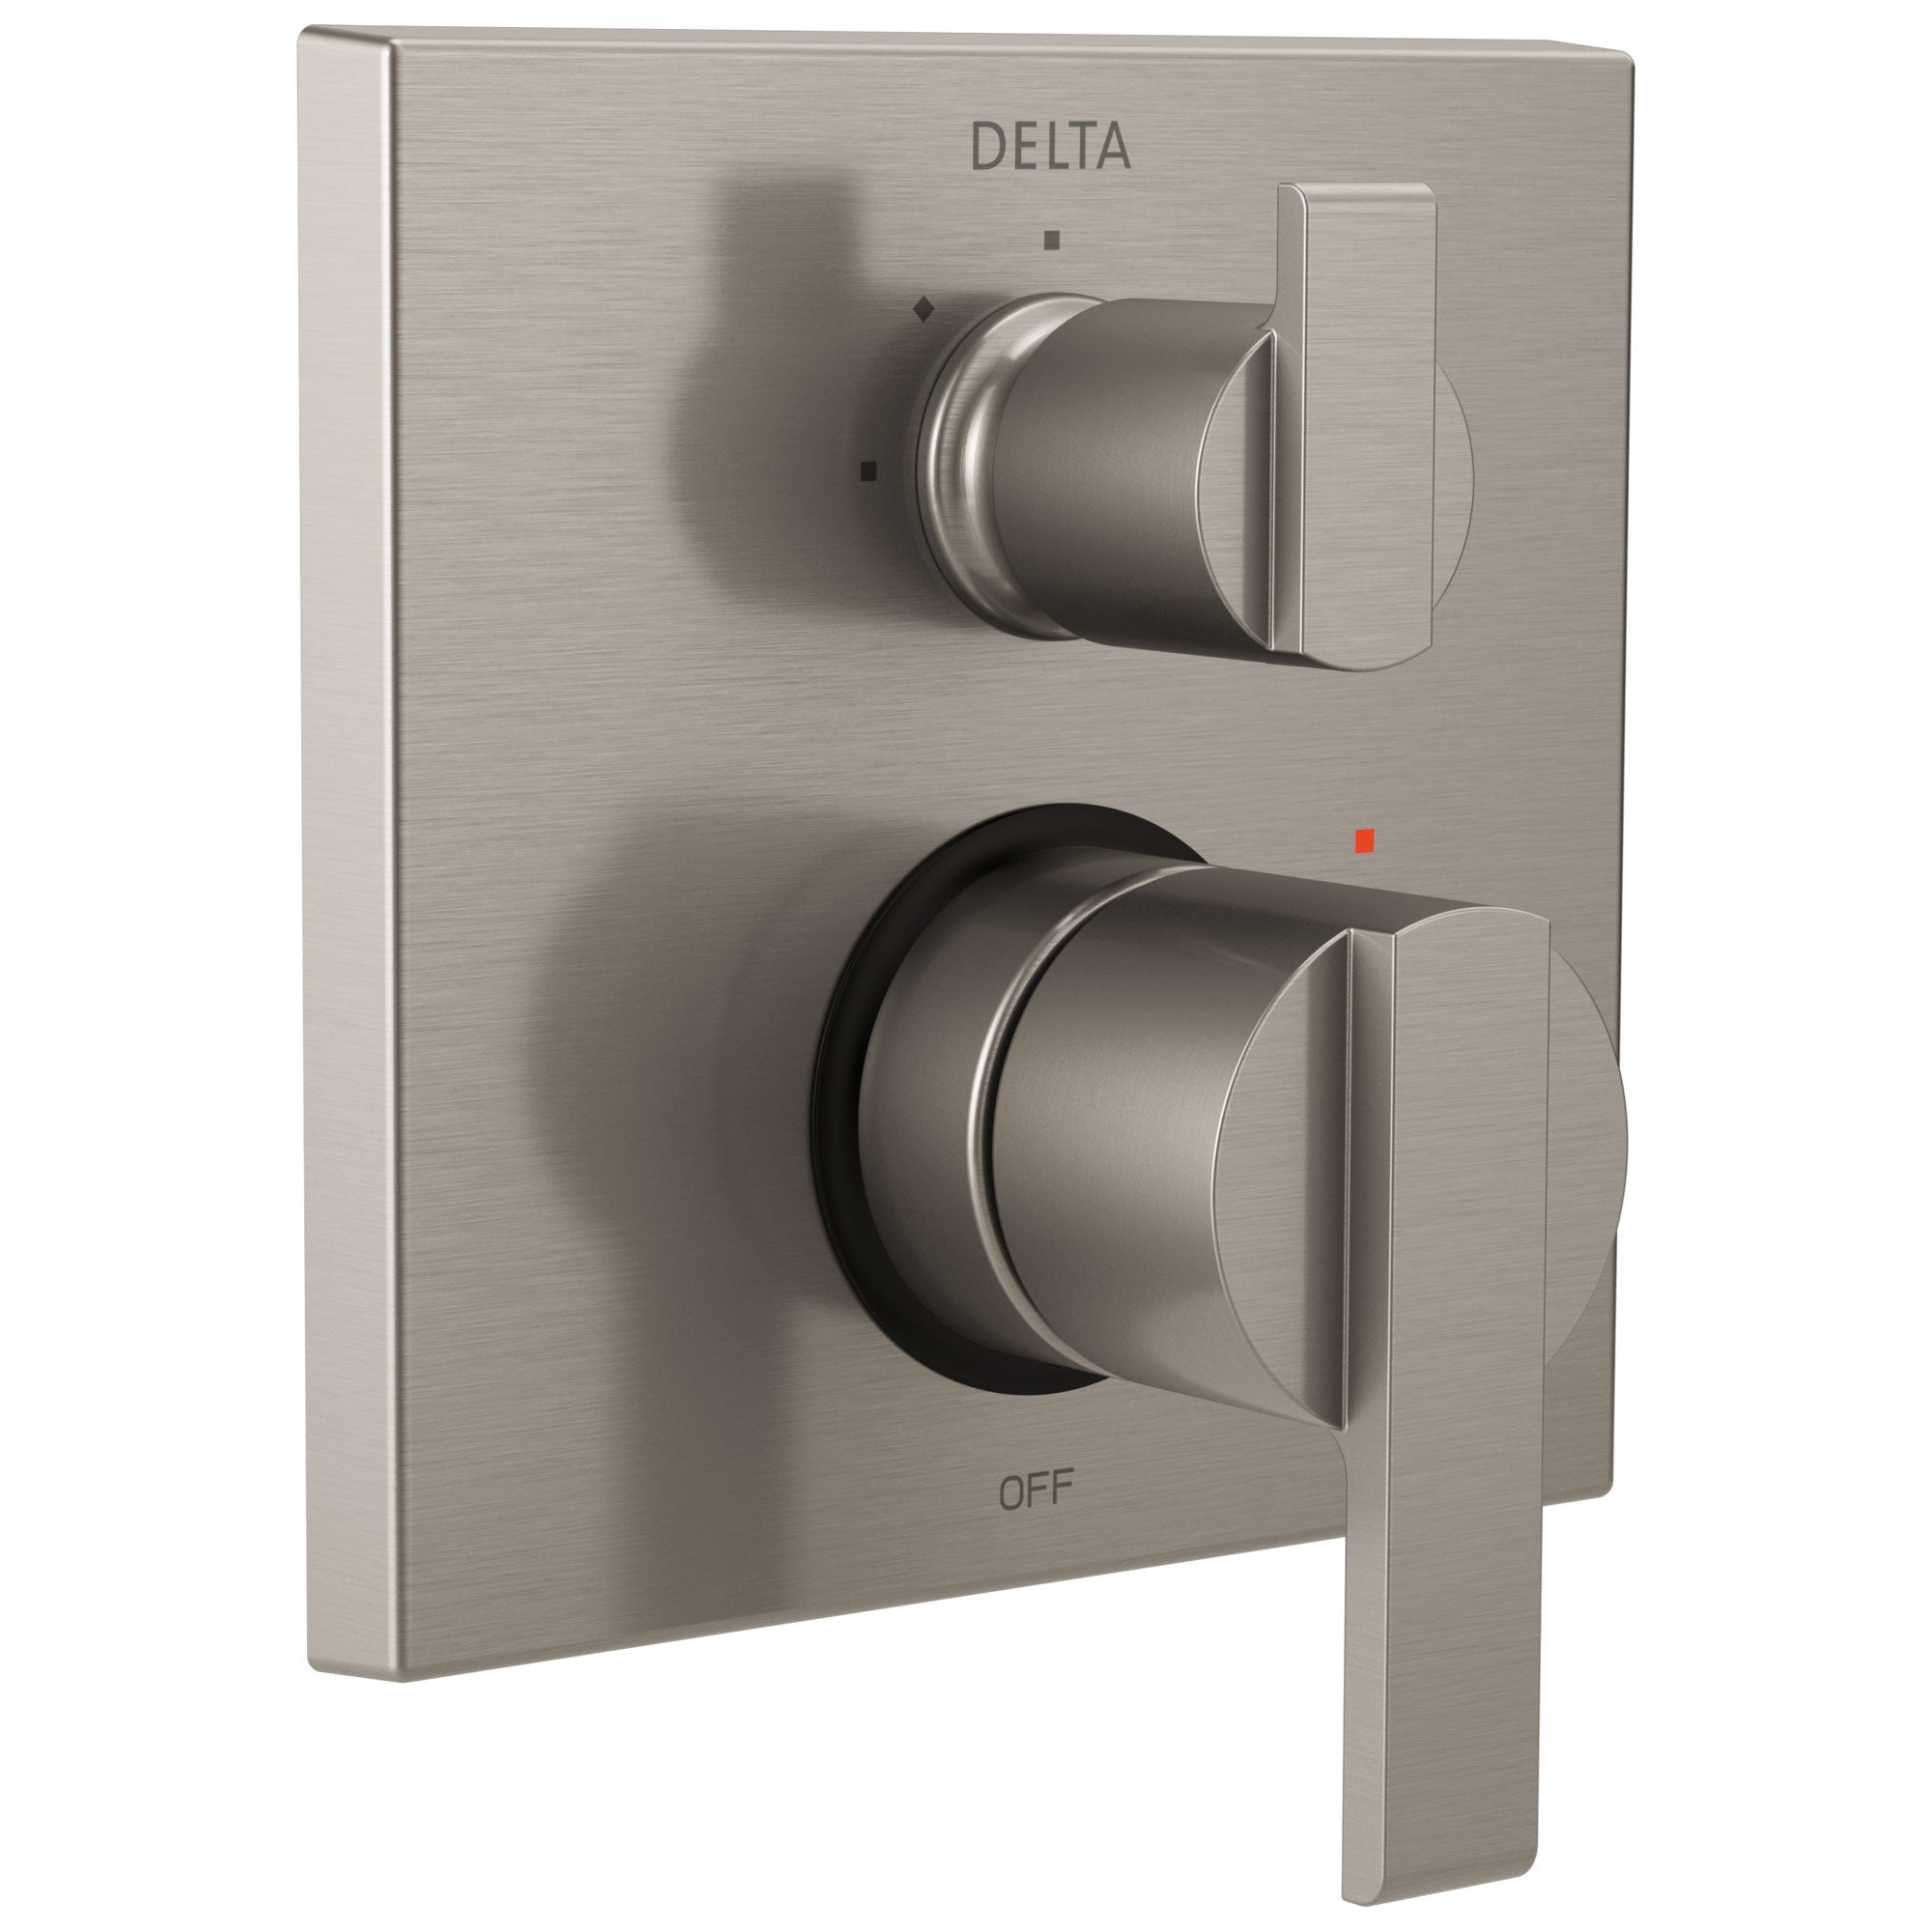 Delta Ara Collection Stainless Steel Finish Shower Faucet Valve Trim Control Handle with 3-Setting Integrated Diverter (Requires Valve) DT24867SS